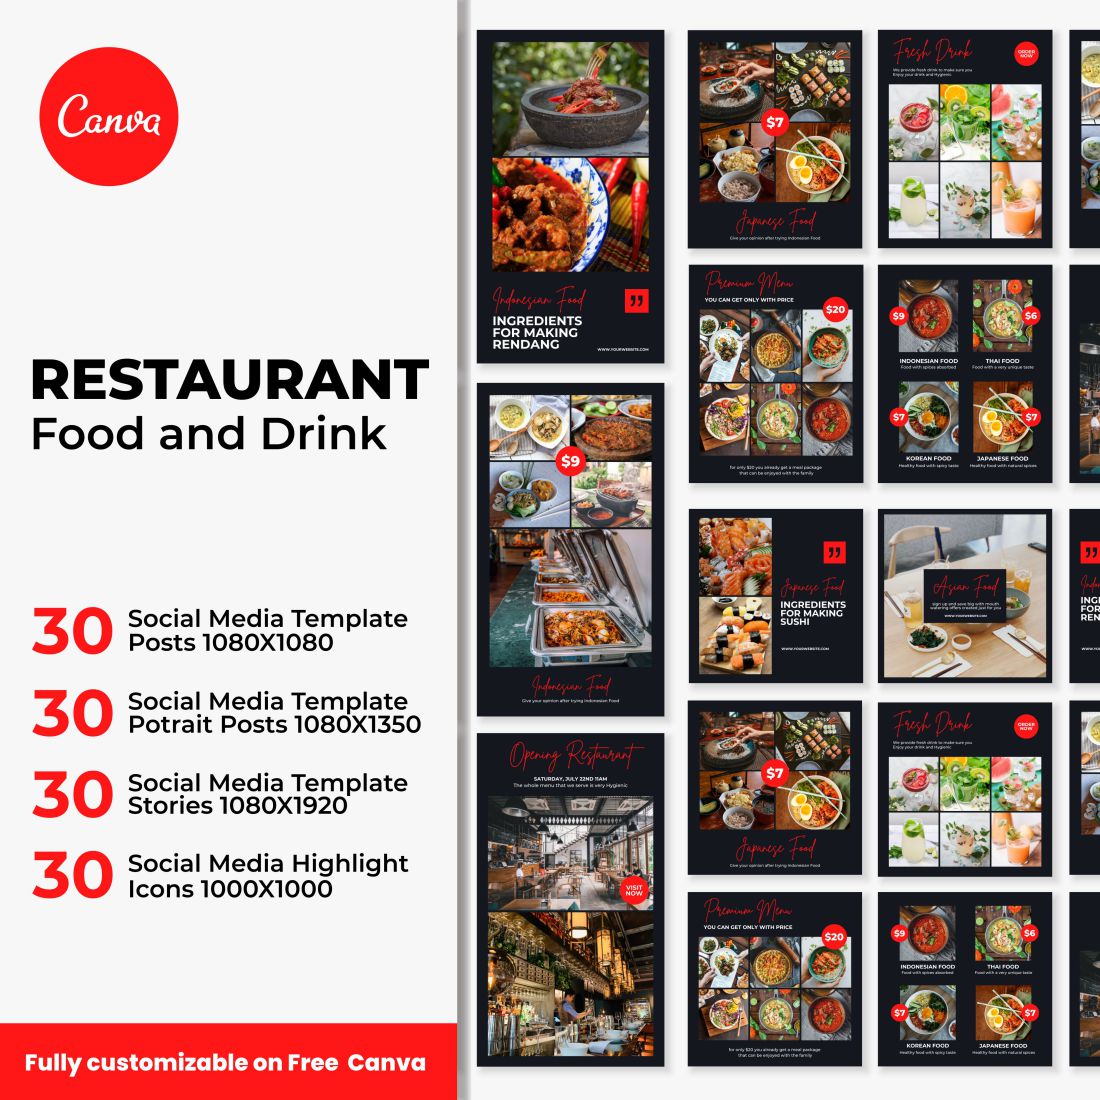 Food And Restaurant Instagram Post Canva Instagram Templates Cover Image.